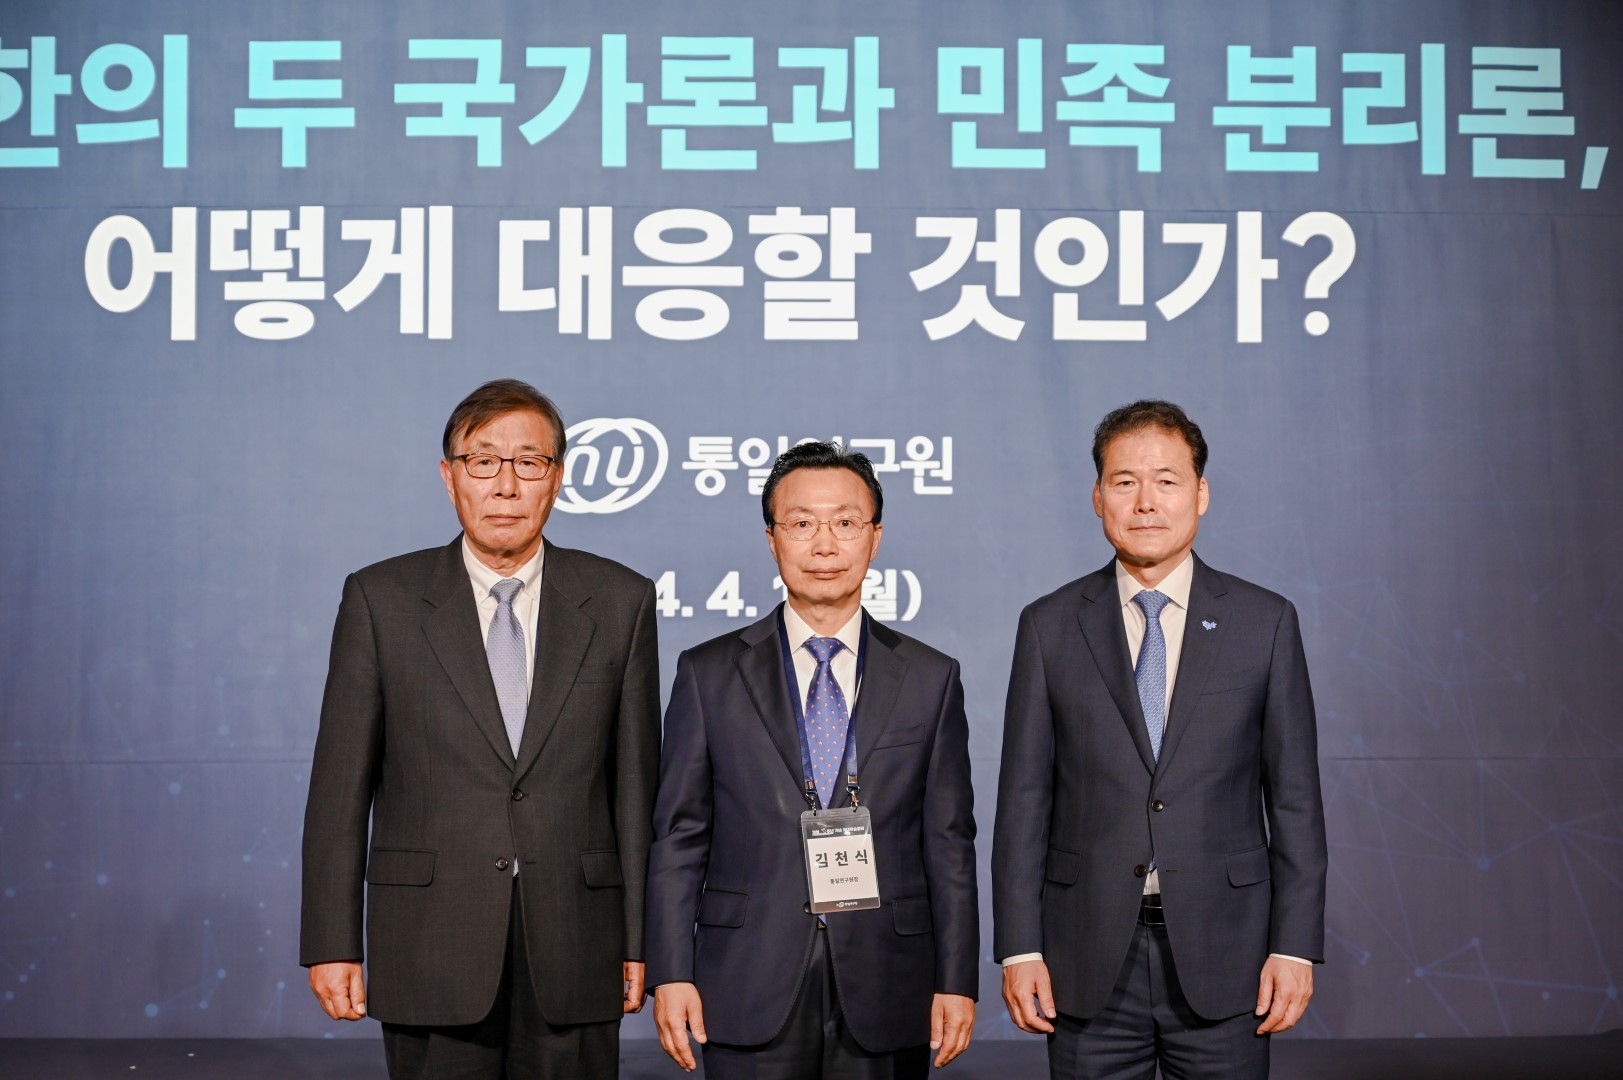 Academic Conference to Celebrate the 33rd Anniversary of the Korea Institute for National Unification: North Korea’s Two State Rhetoric and Ethnic Separatism: South Korea’s Countermeasures 행사 대표 사진